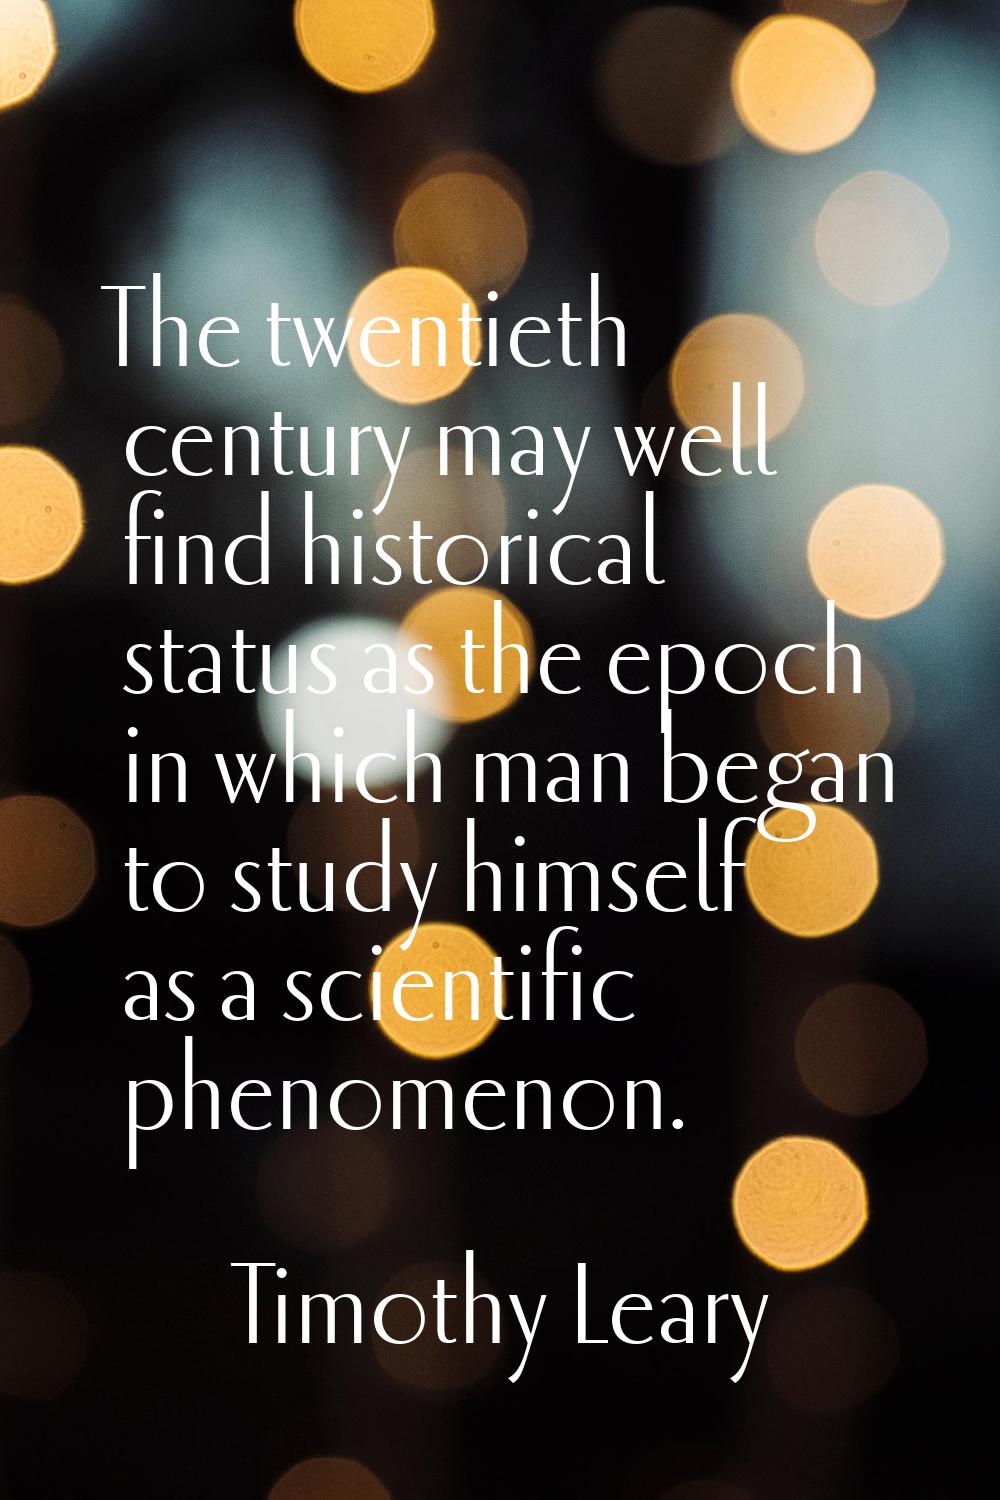 The twentieth century may well find historical status as the epoch in which man began to study hims